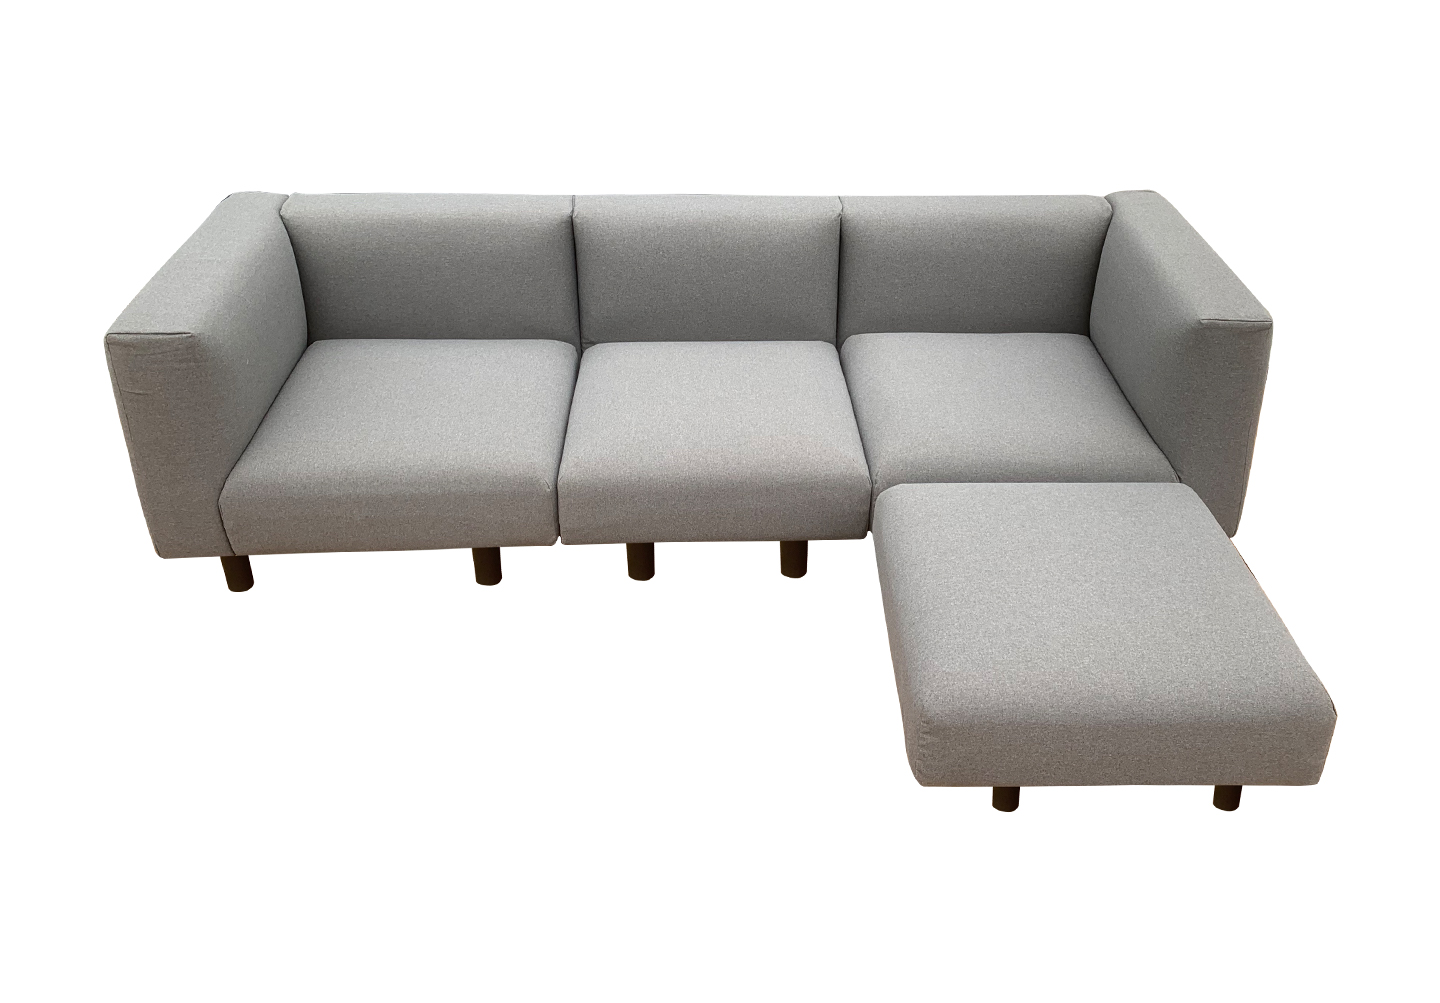 319 all-weather sectional sofa with changeable cushions